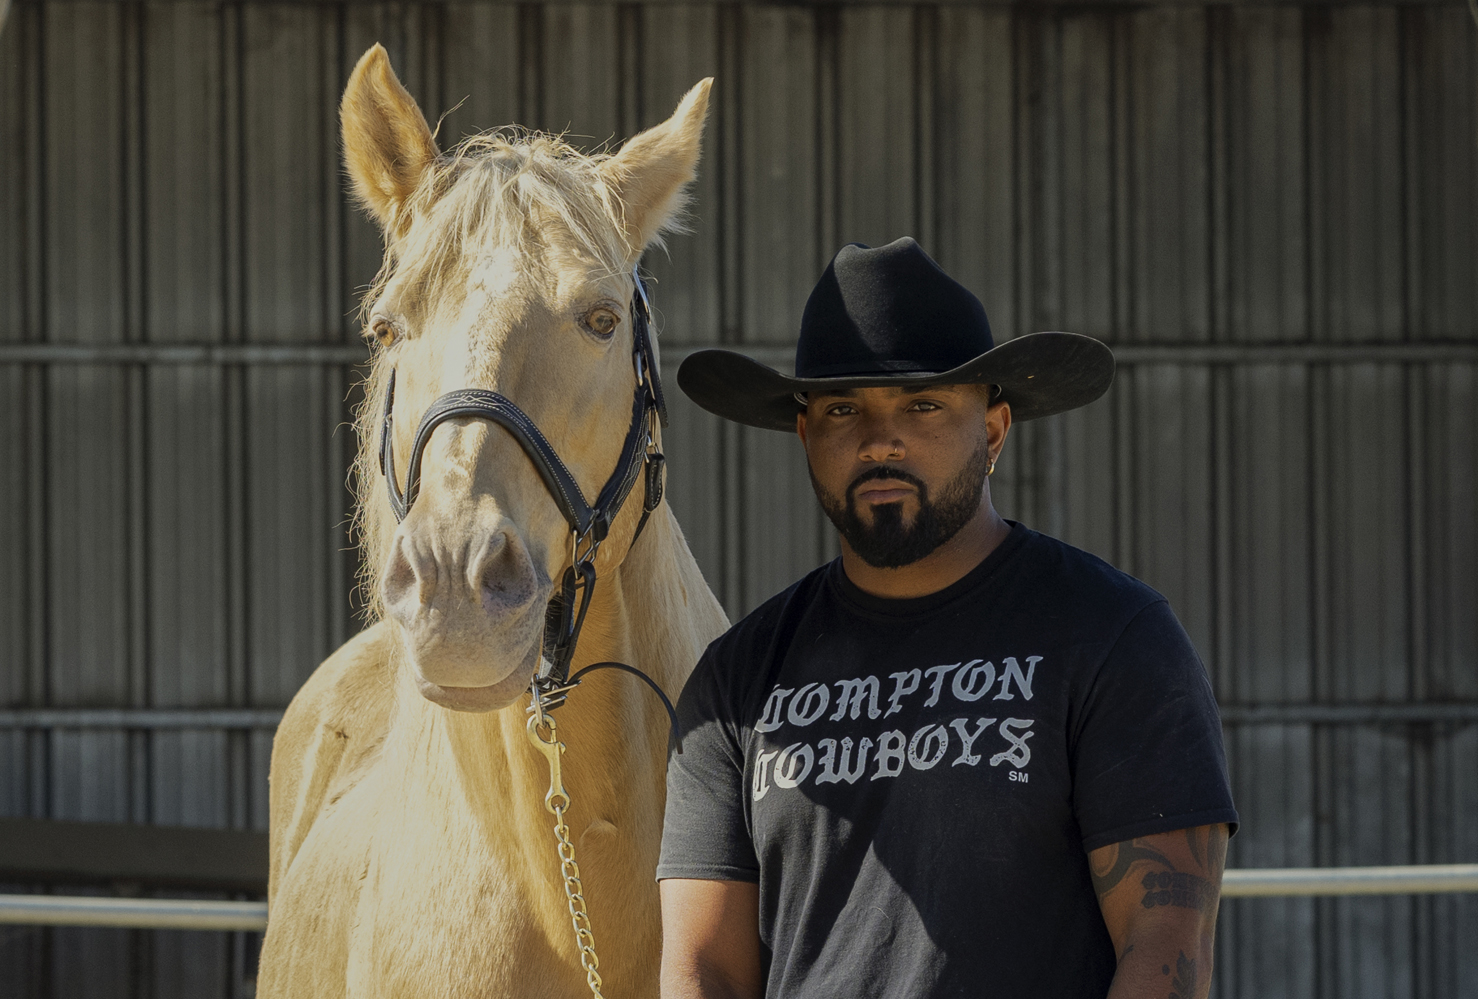 Compton Cowboys man standing next to blonde horse